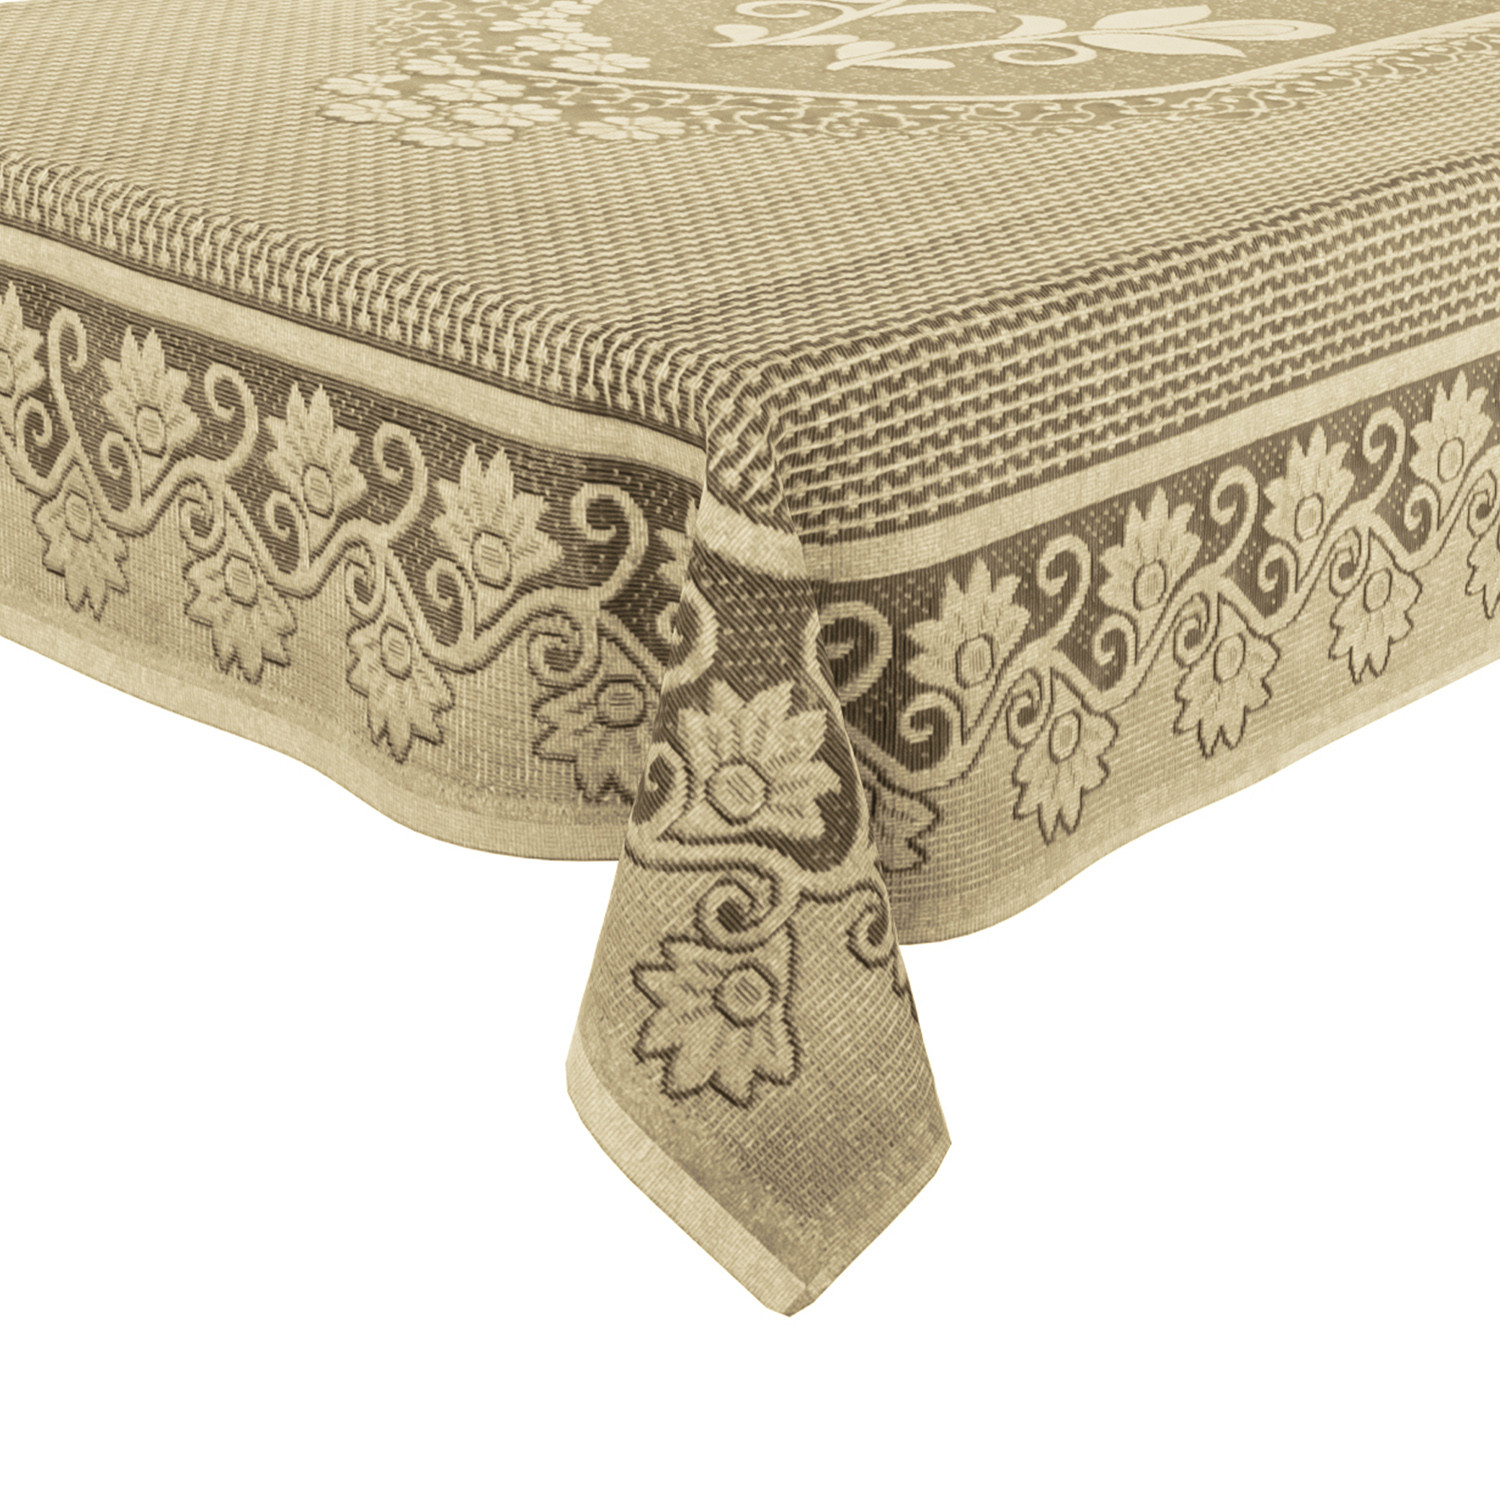 Kuber Industries Center Table Cover|Cotton Luxurious Net Floral S-19 Design|Stain-Resistant & Anti Skid Coffee Table Cover|40x60 Inch (Cream)